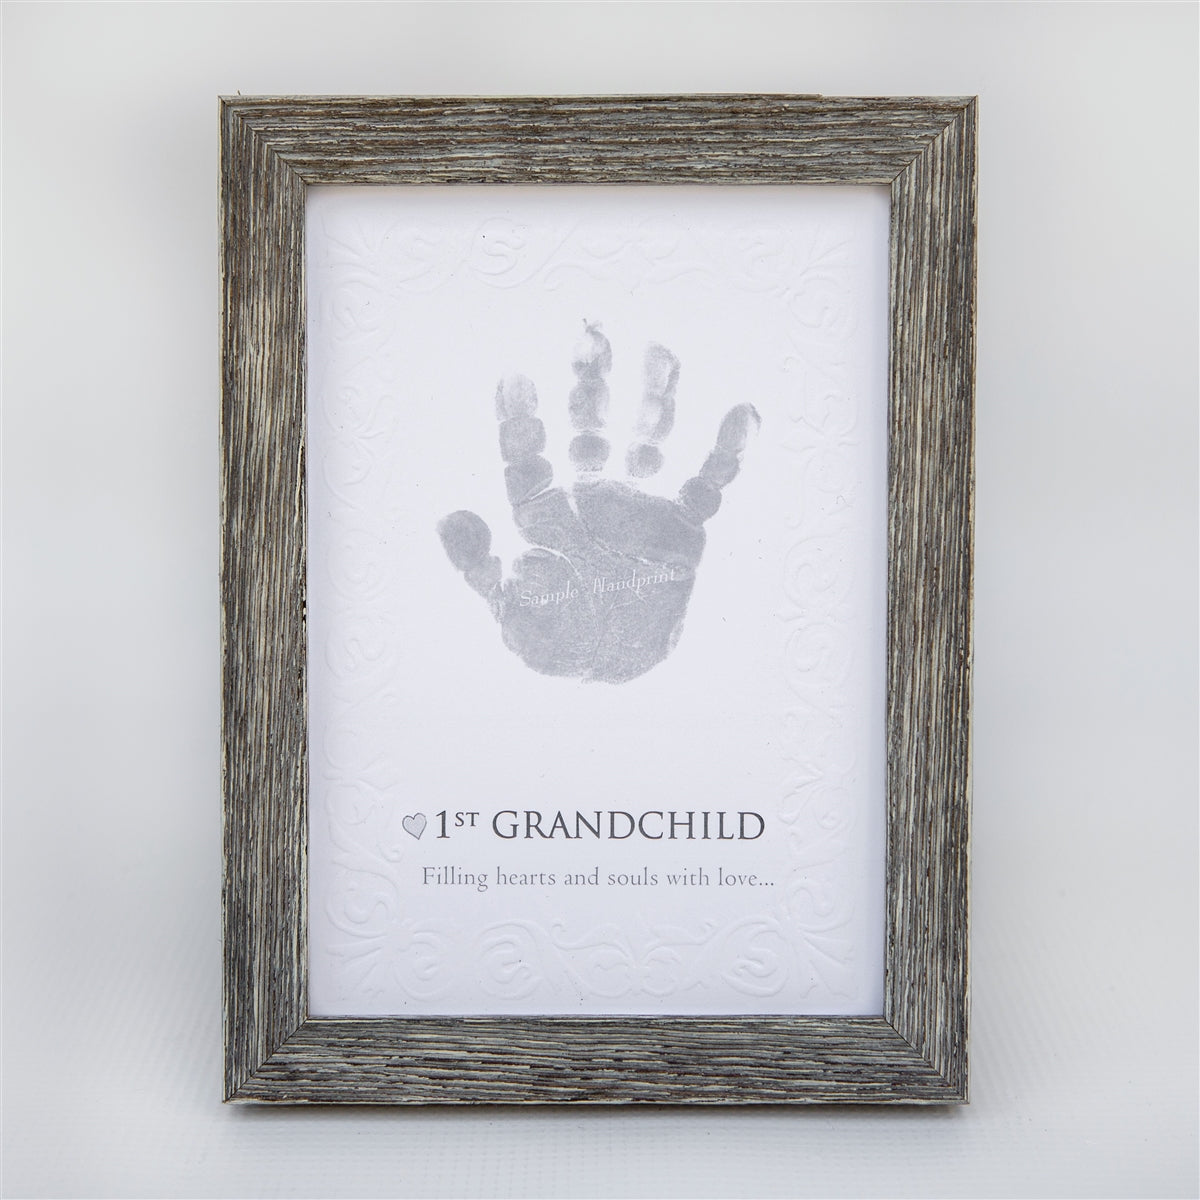 5x7 farmhouse frame with "1st Grandchild" sentiment on embossed cardstock with space for a child's handprint.